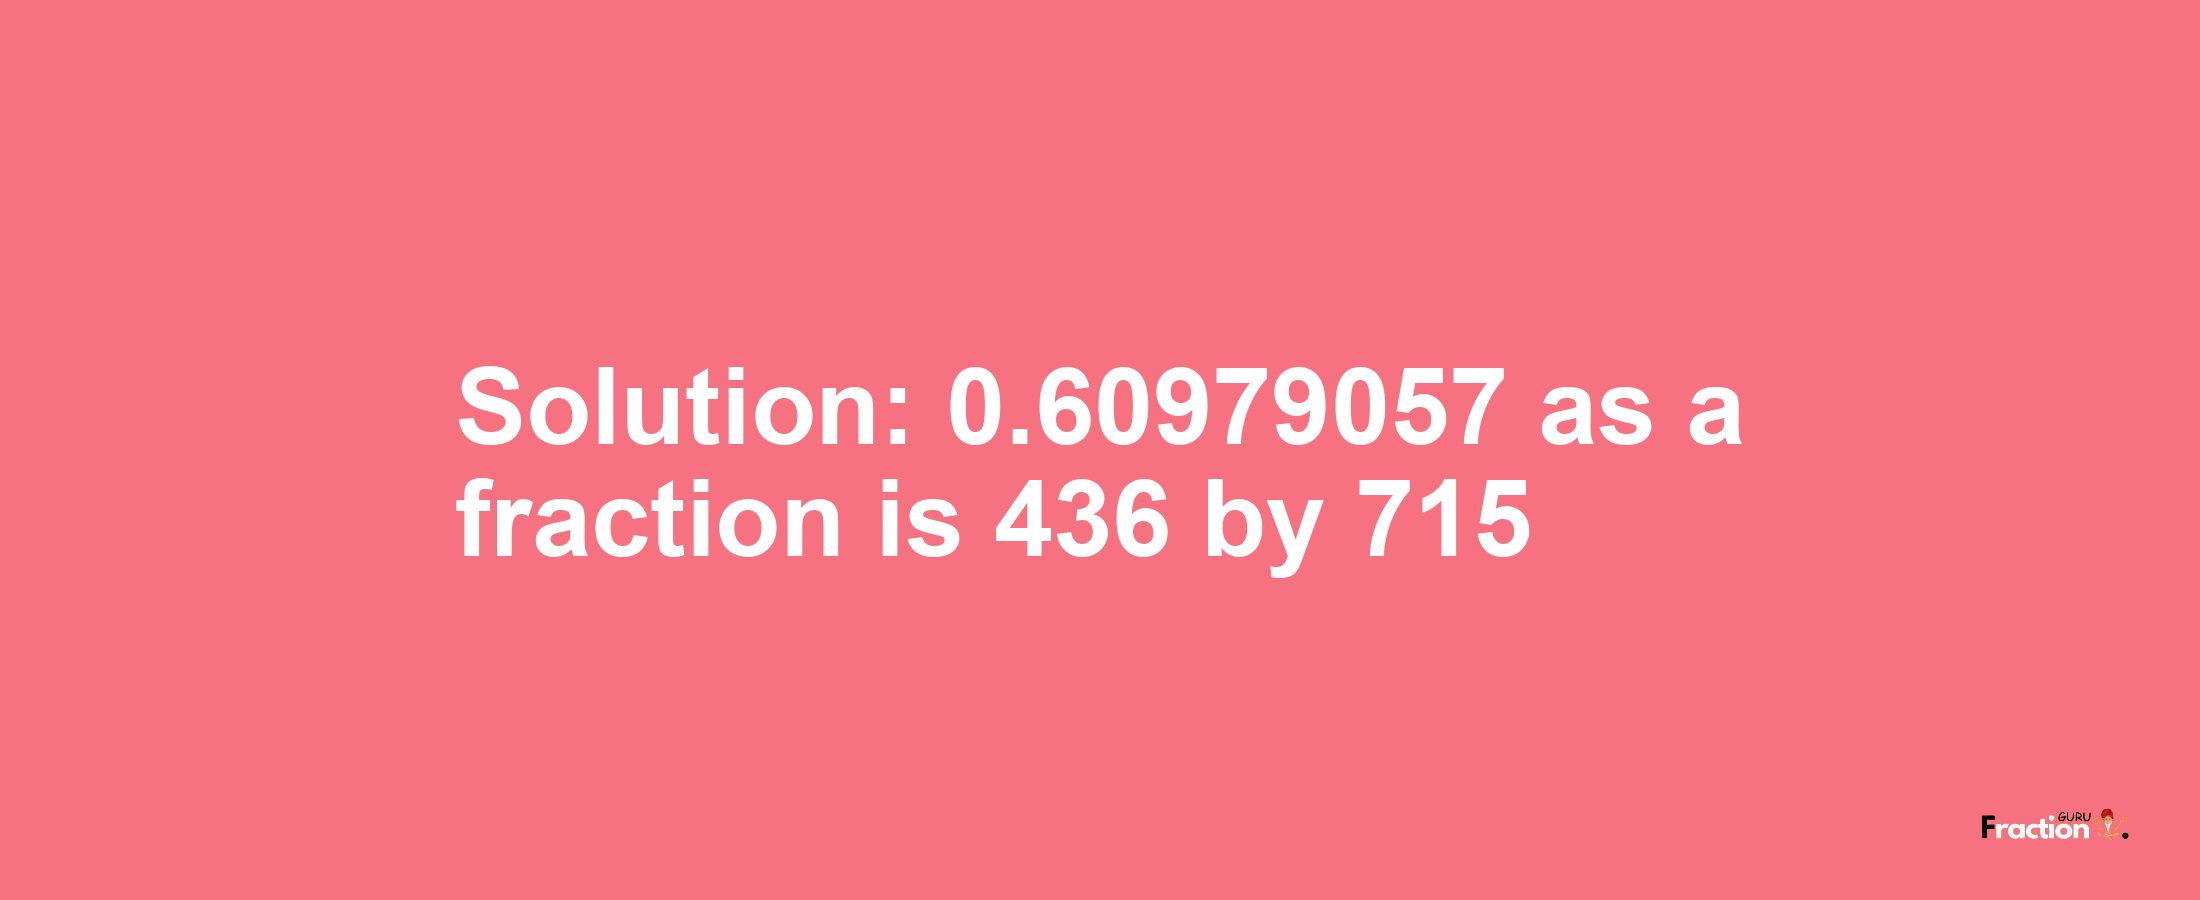 Solution:0.60979057 as a fraction is 436/715